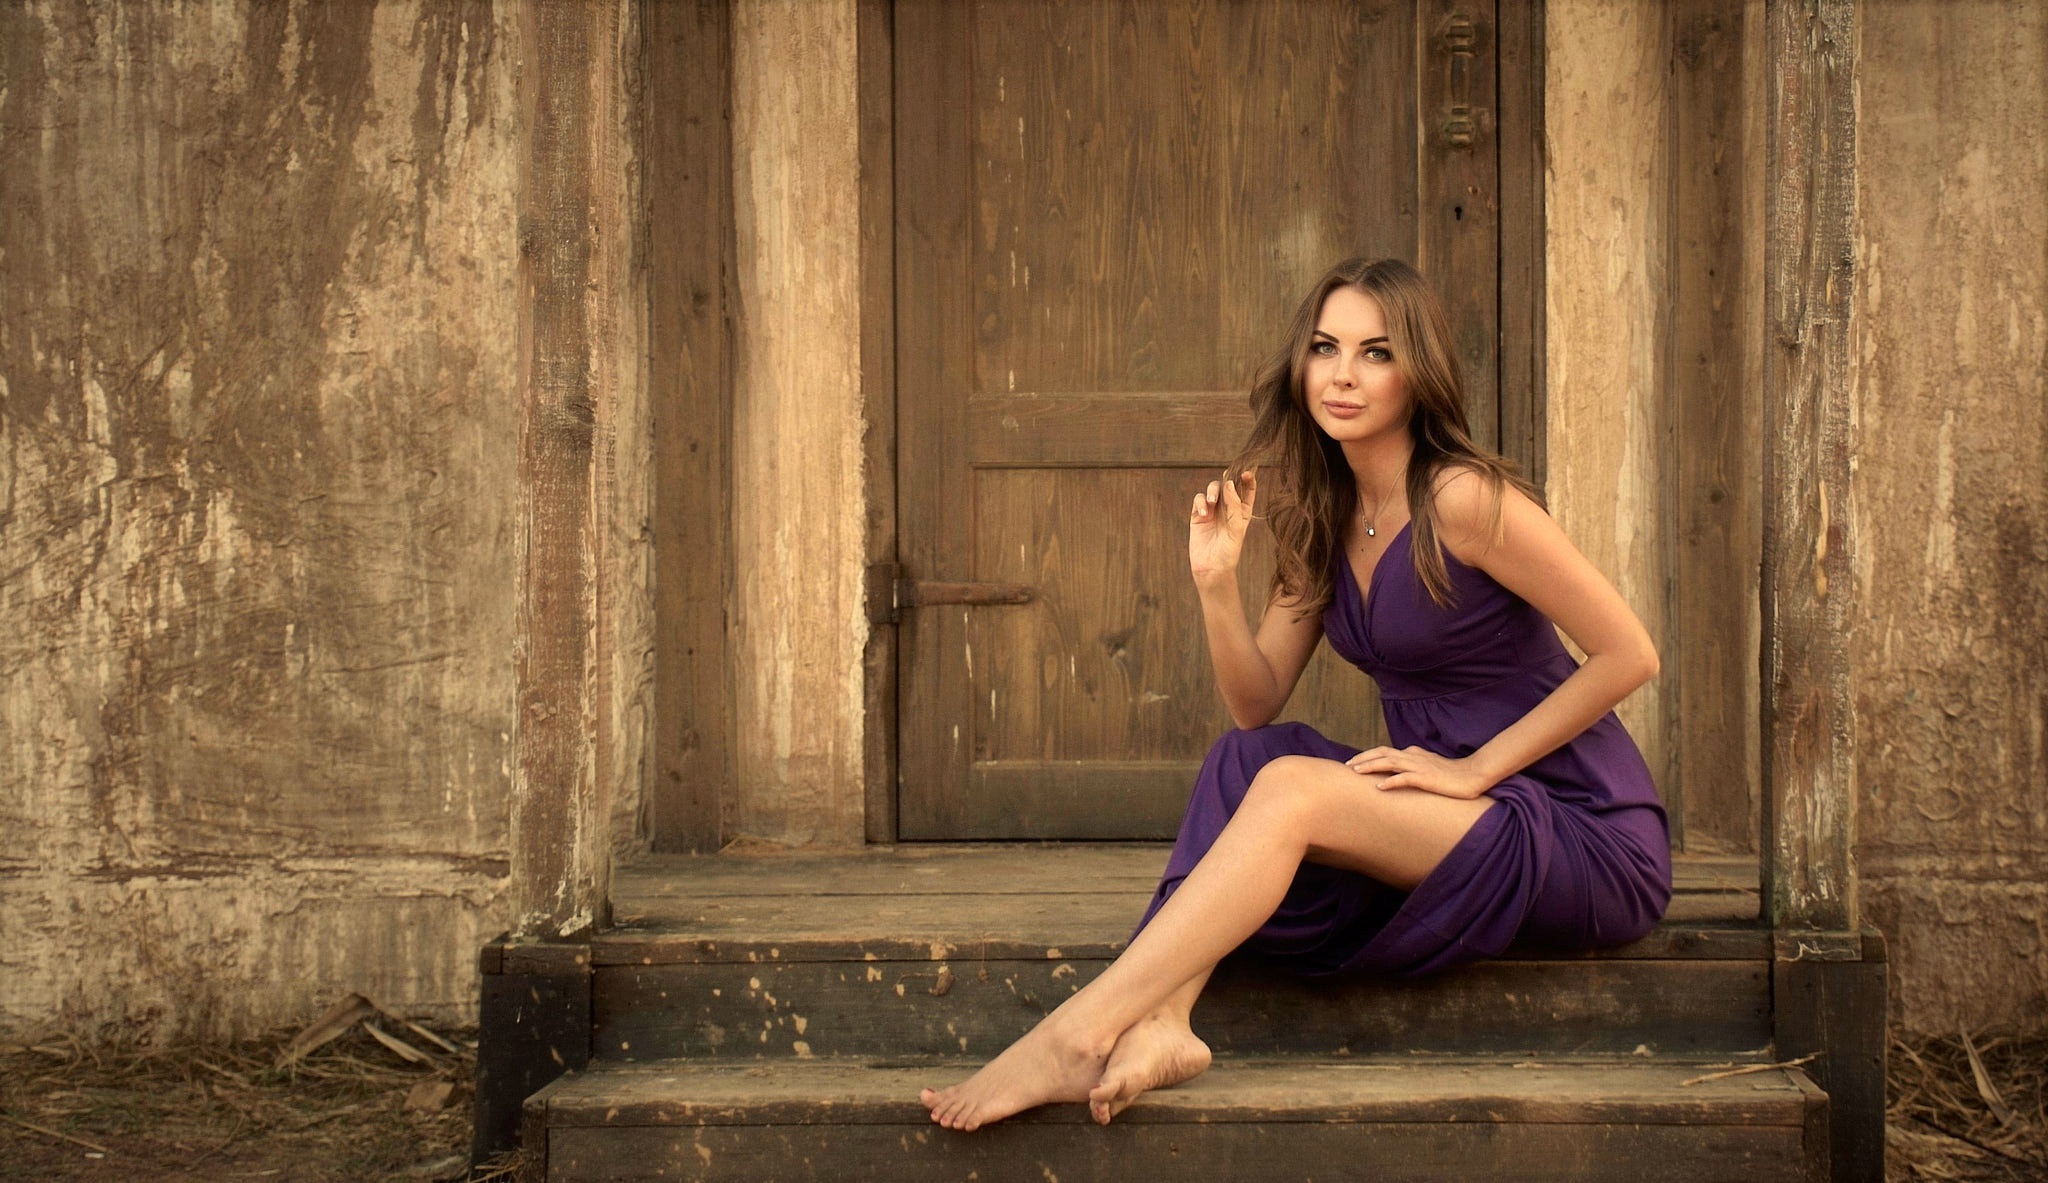 girl, pose, house, makeup, dress, the door, hairstyle, steps, brown hair, l...